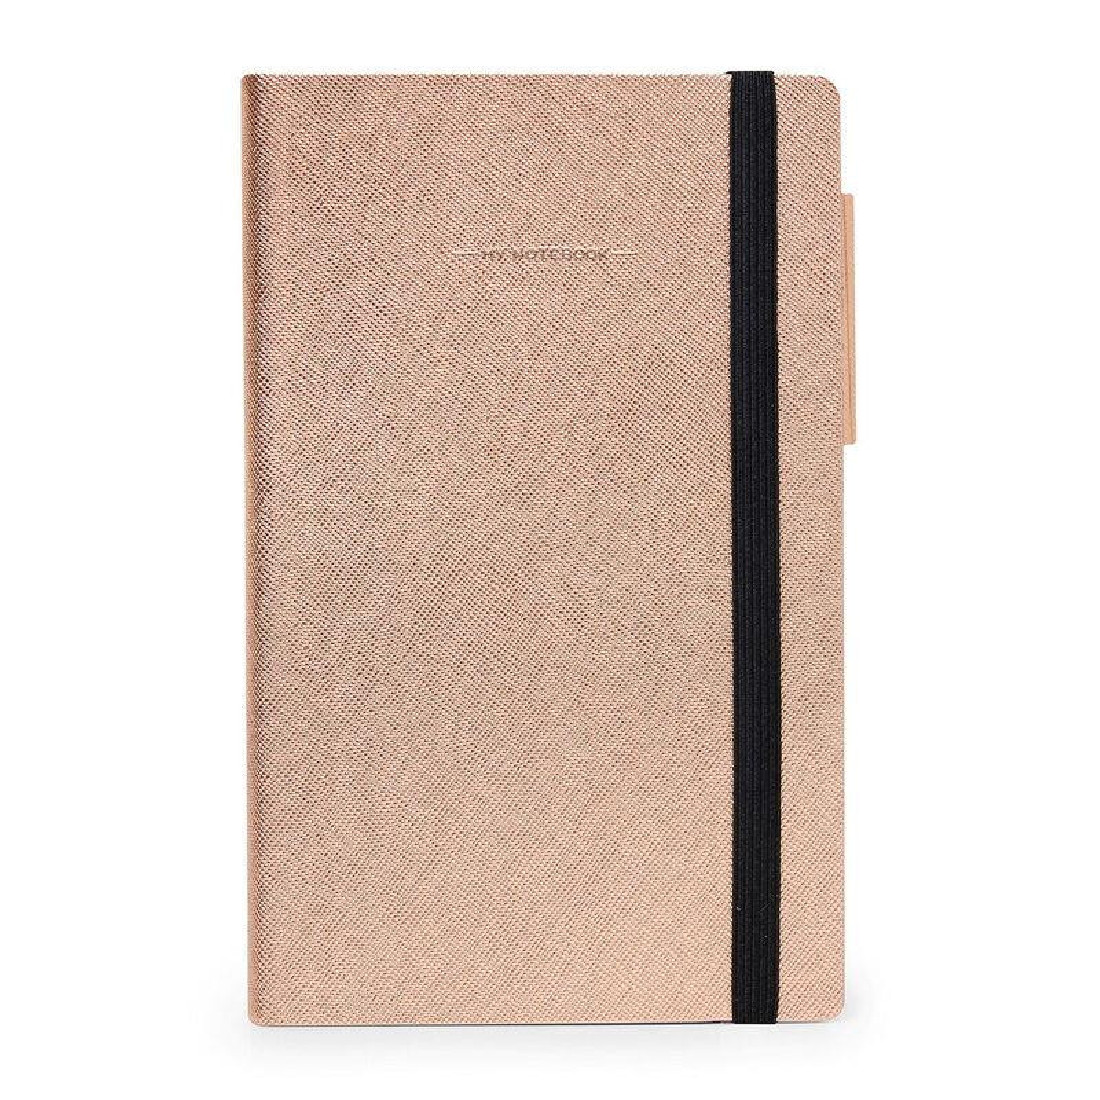 NOTEBOOK LINED ( 12 X 18 cm ) ROSE GOLD LEGAMI